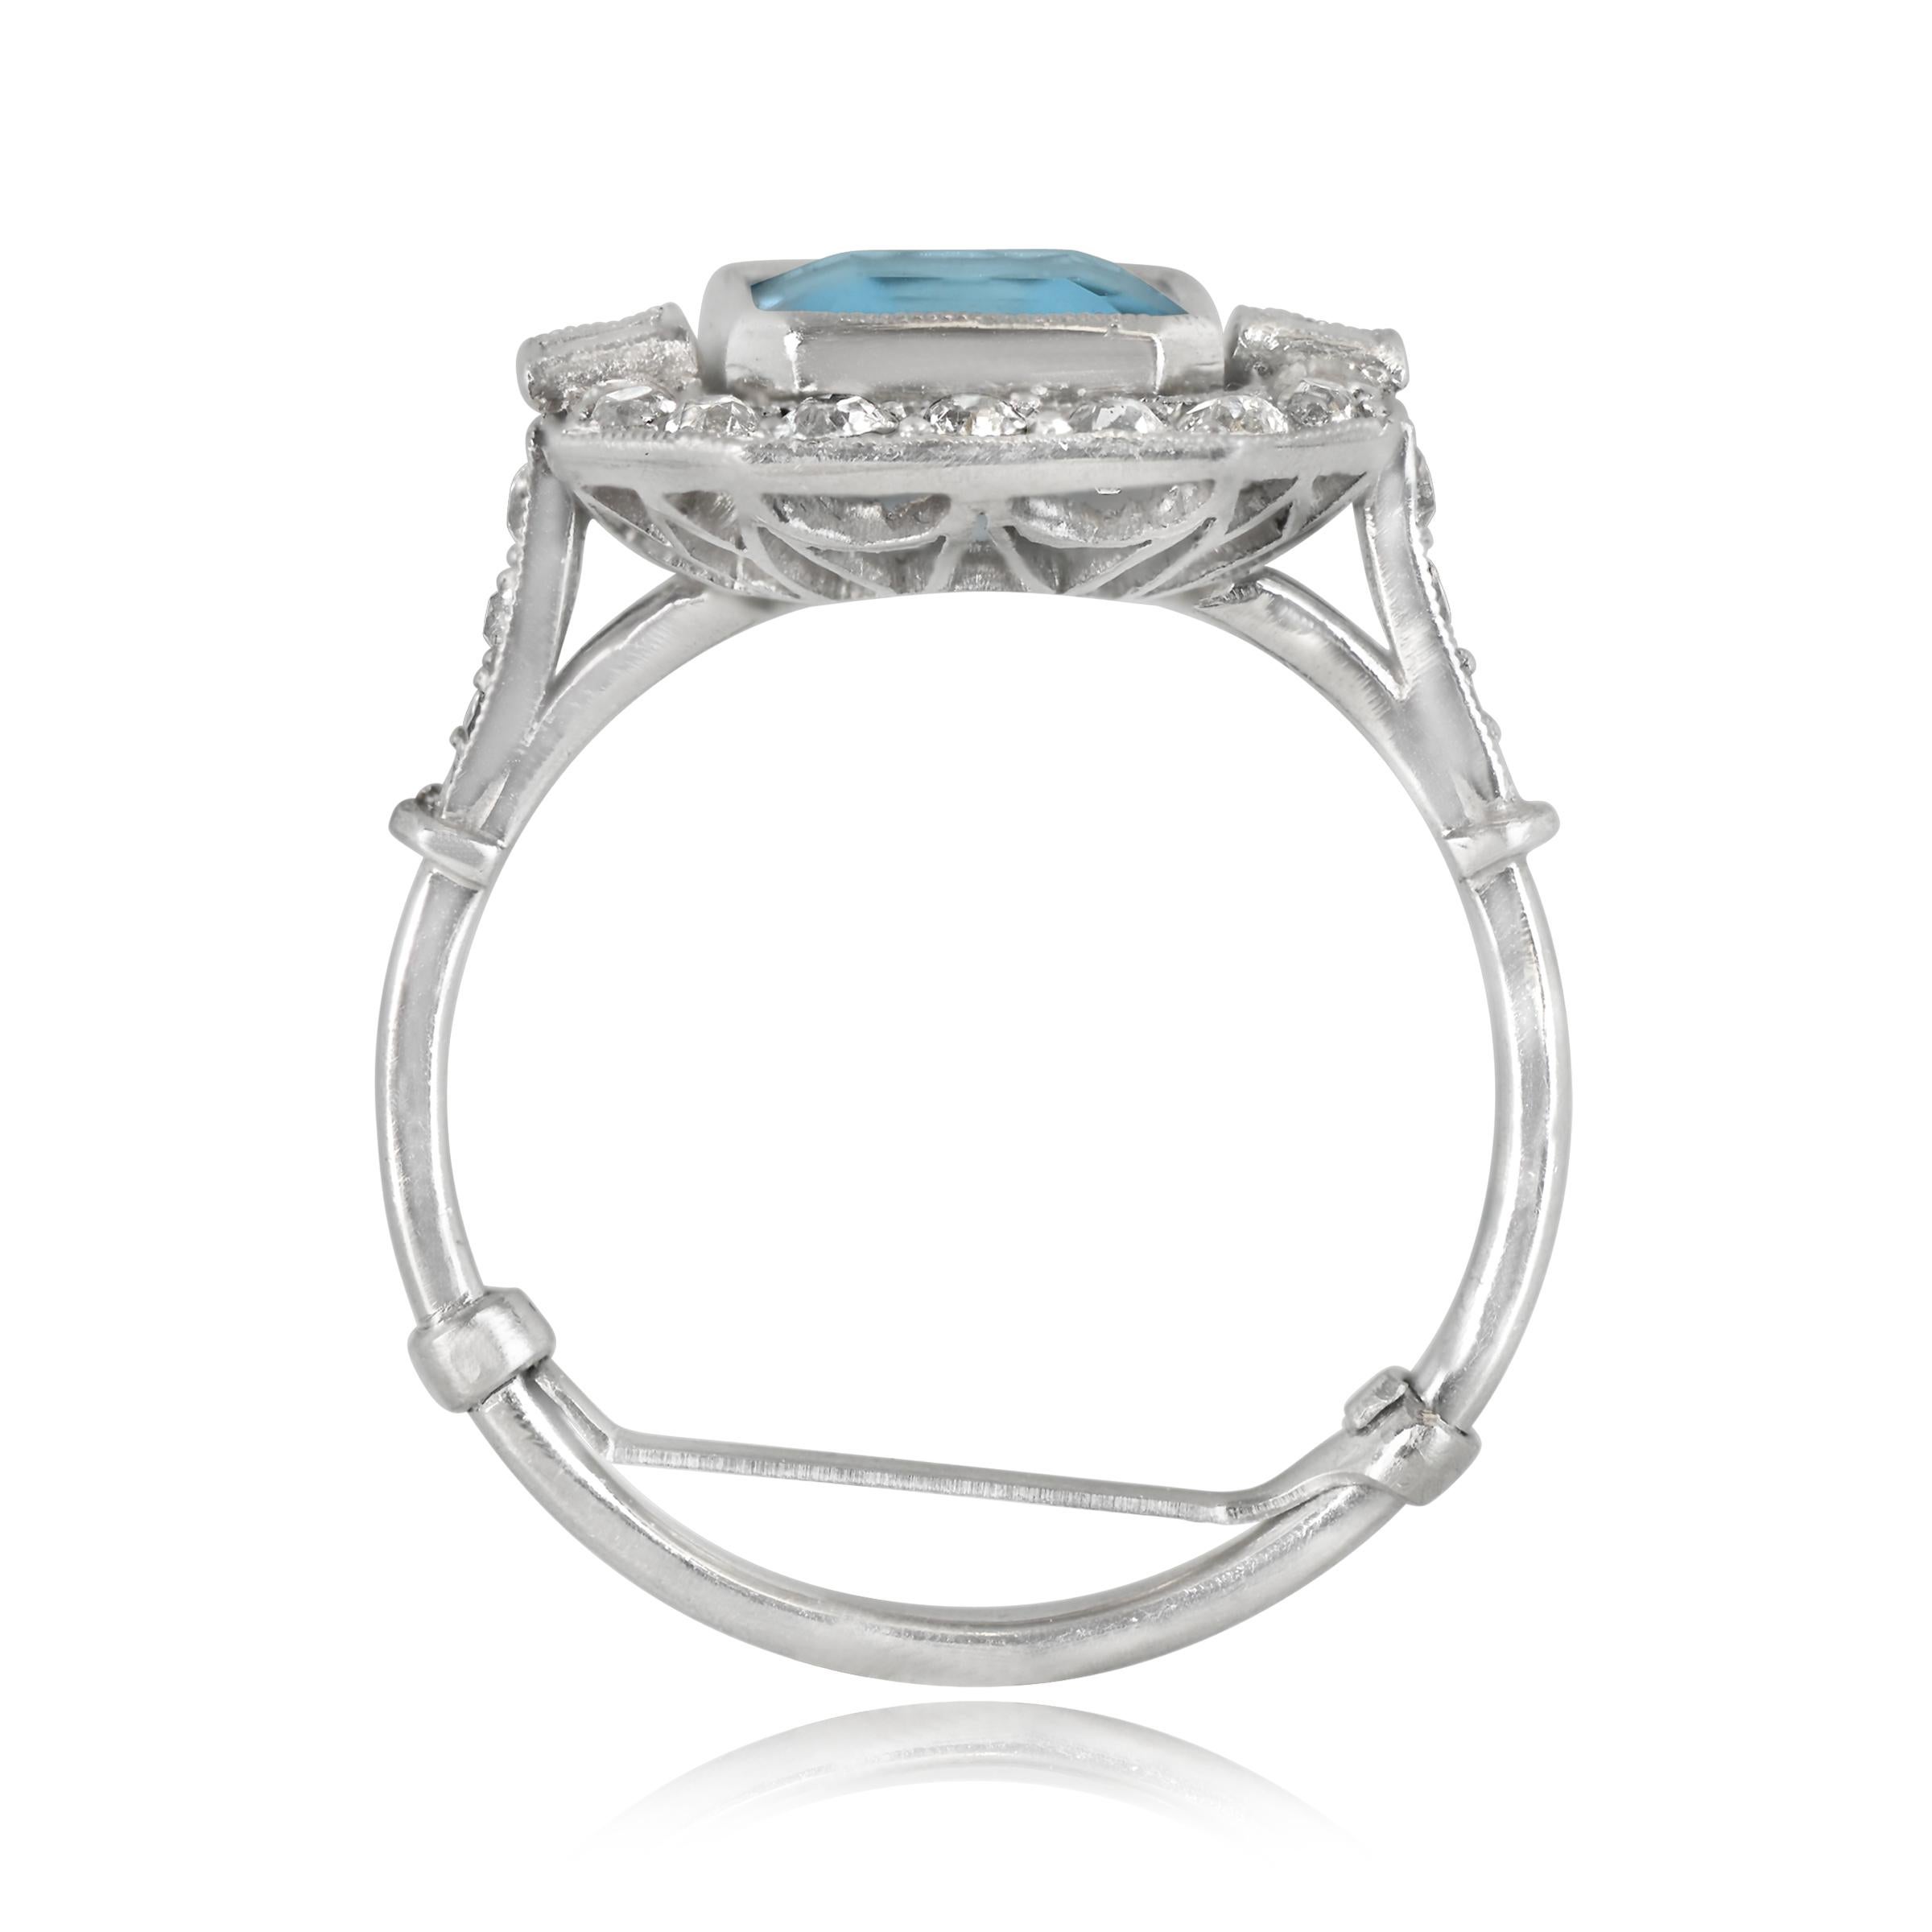 2.54ct Emerald Cut Aquamarine Engagement Ring, Diamond Halo, Platinum  In Excellent Condition For Sale In New York, NY